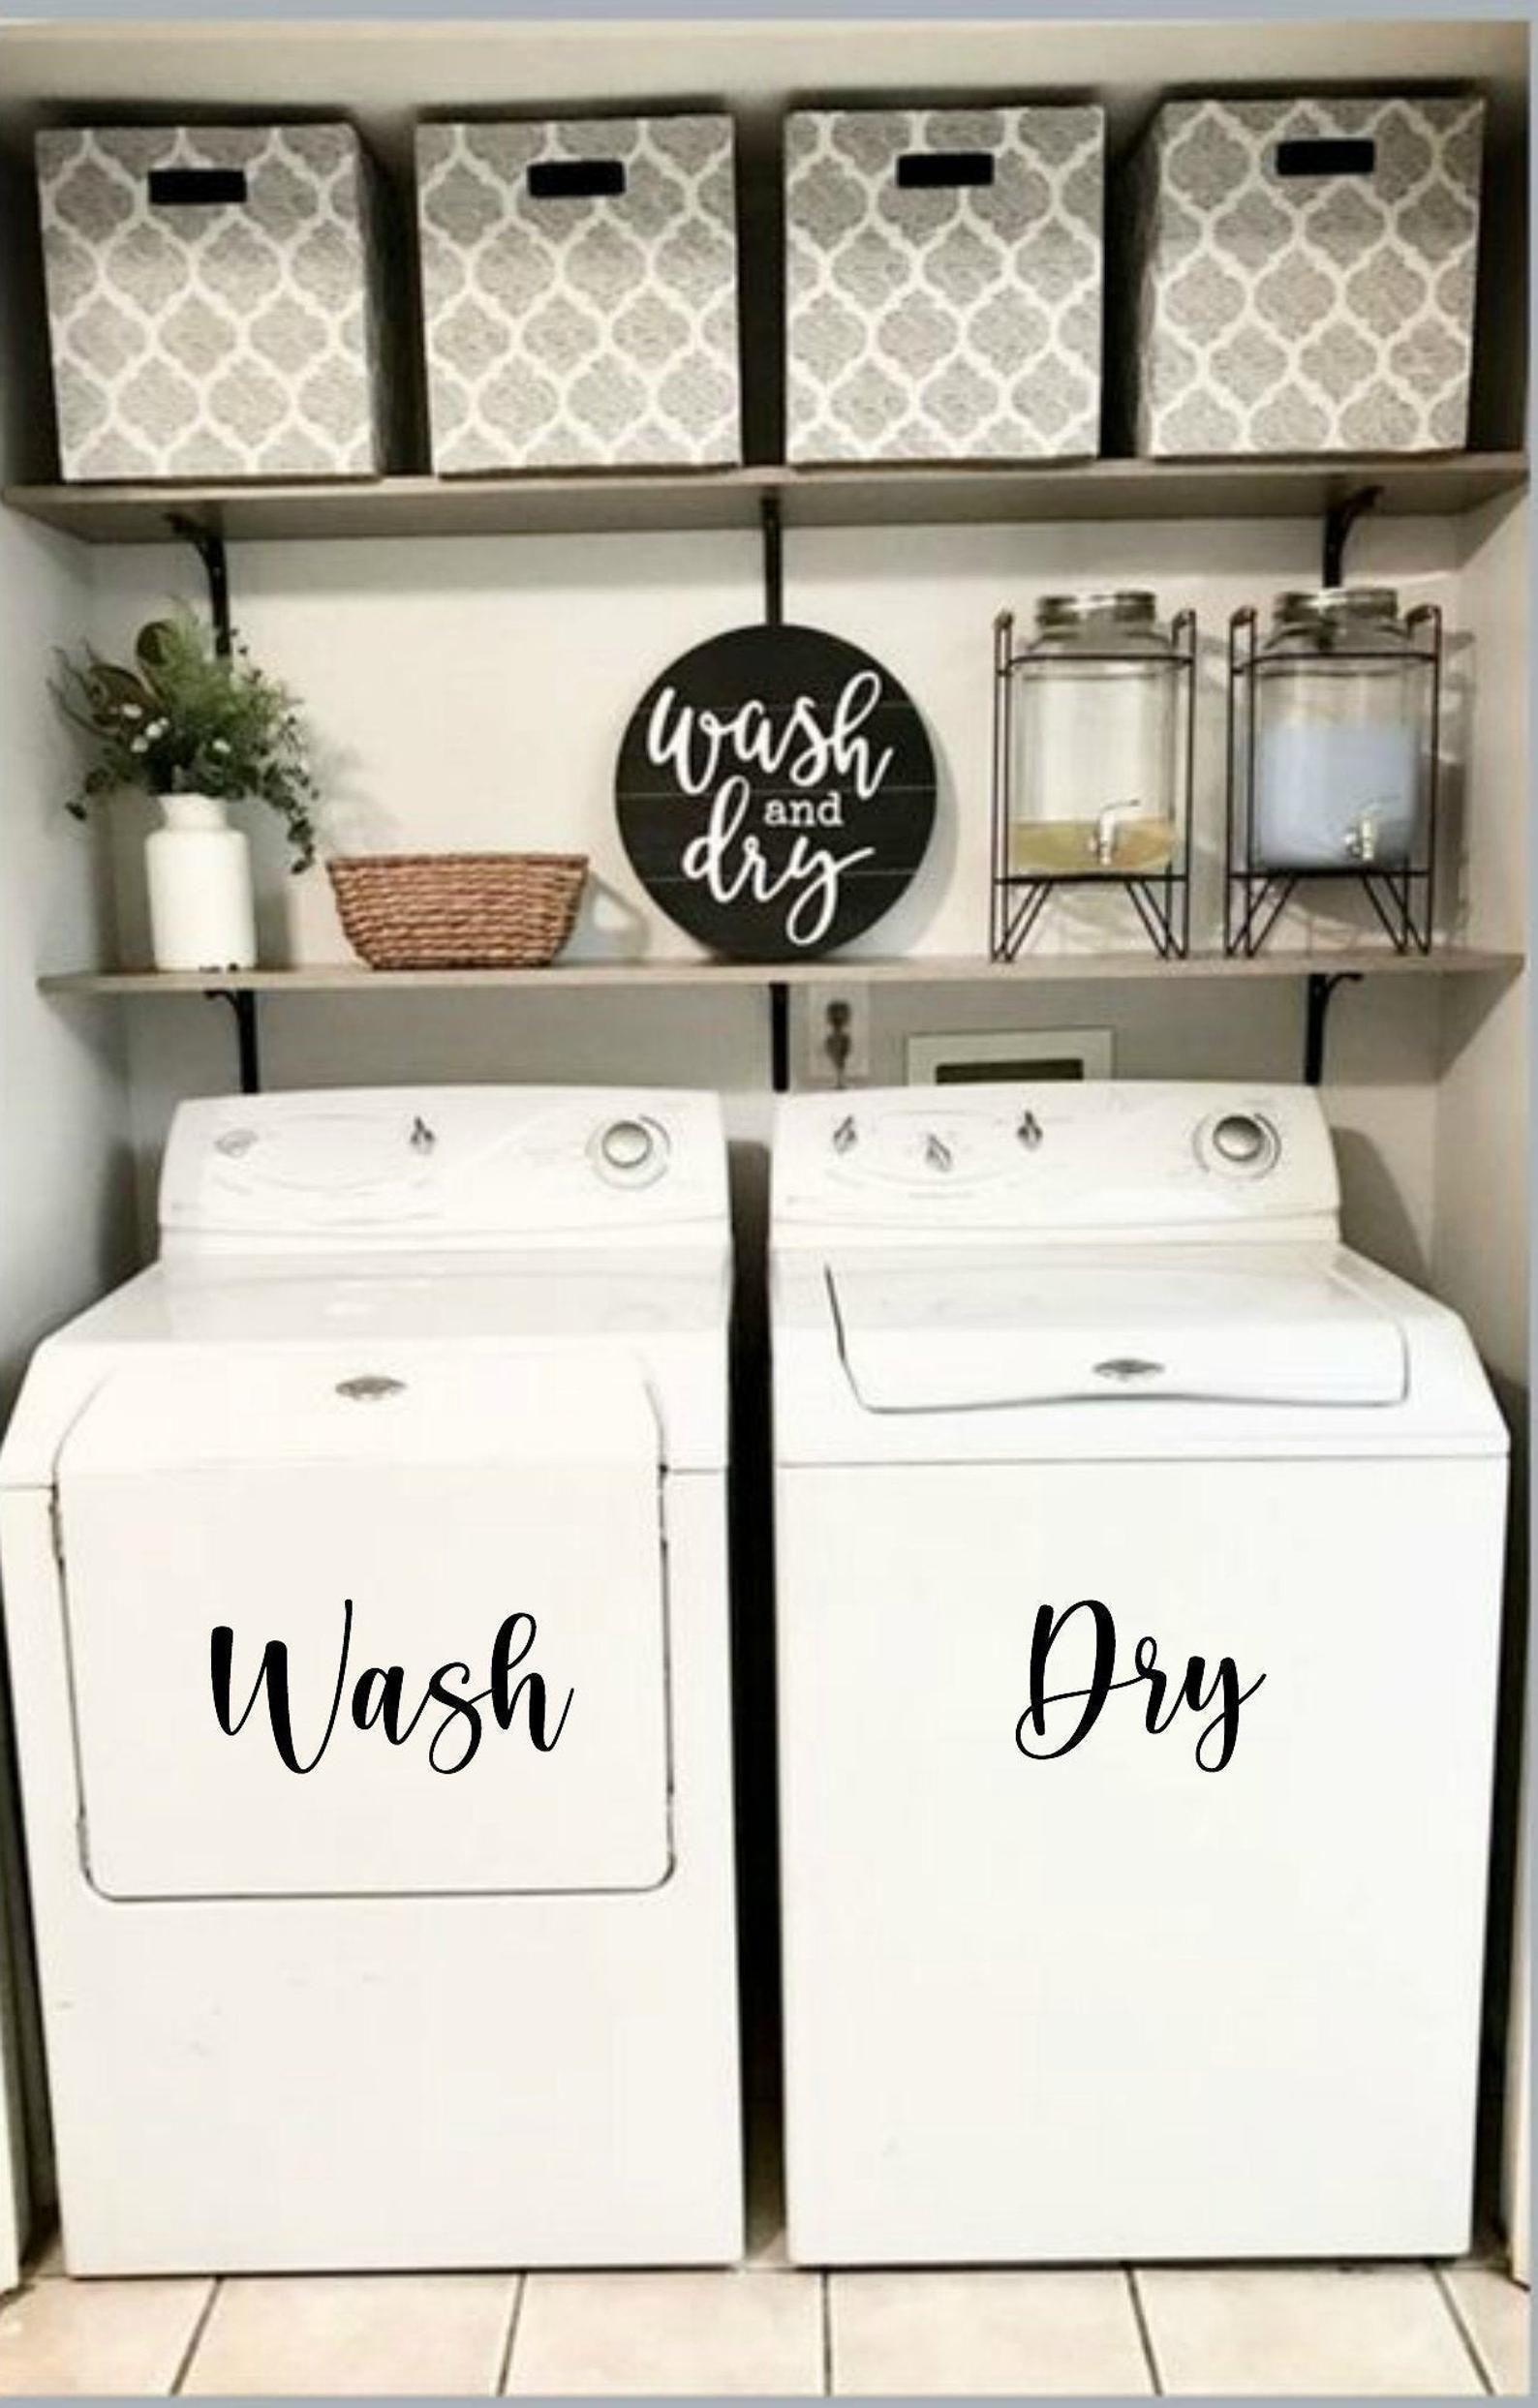 Washer and Dryer Decal // Laundry Room Decal // Wash and Dry Decal // Laundry Room Decor // Powder Room // Home Decor - Washer and Dryer Decal // Laundry Room Decal // Wash and Dry Decal // Laundry Room Decor // Powder Room // Home Decor -   16 home decor for cheap small houses ideas